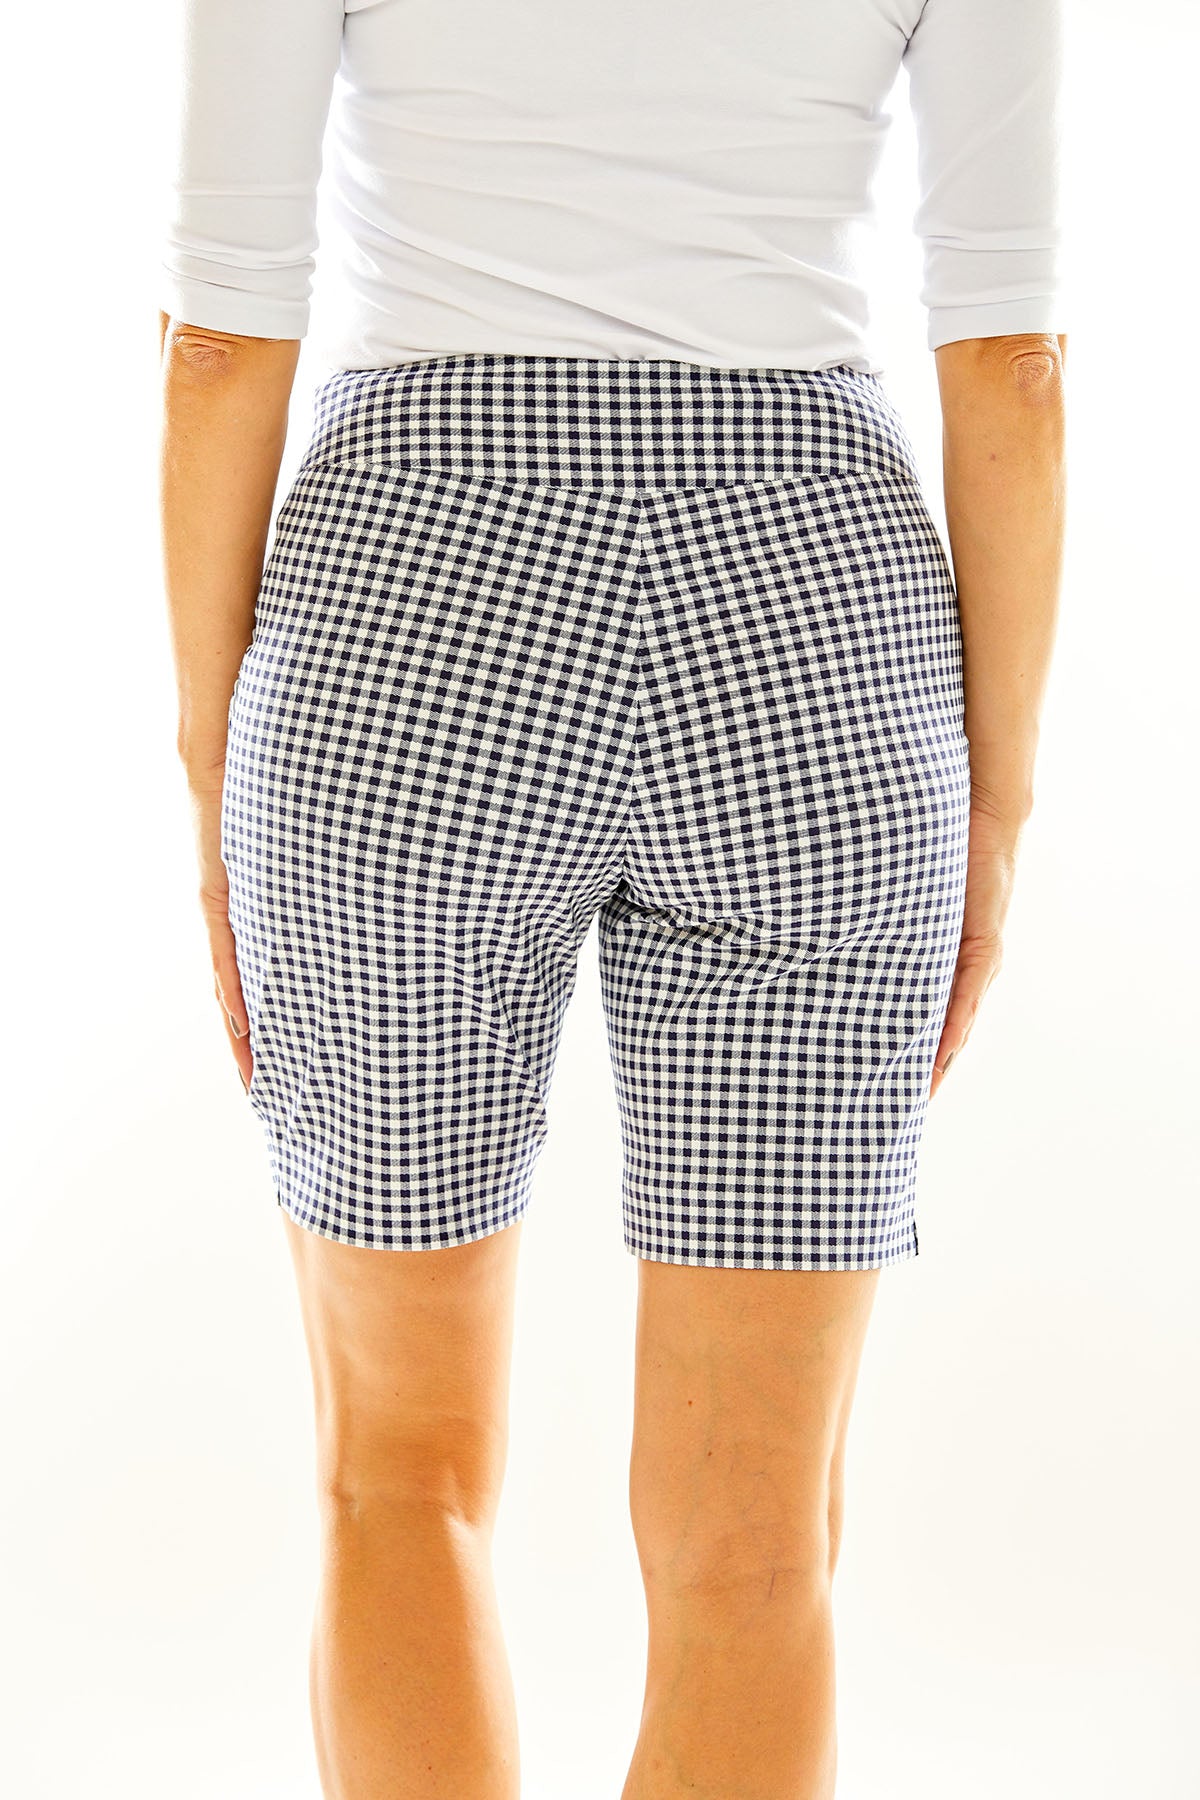 Woman in gingham golf shorts